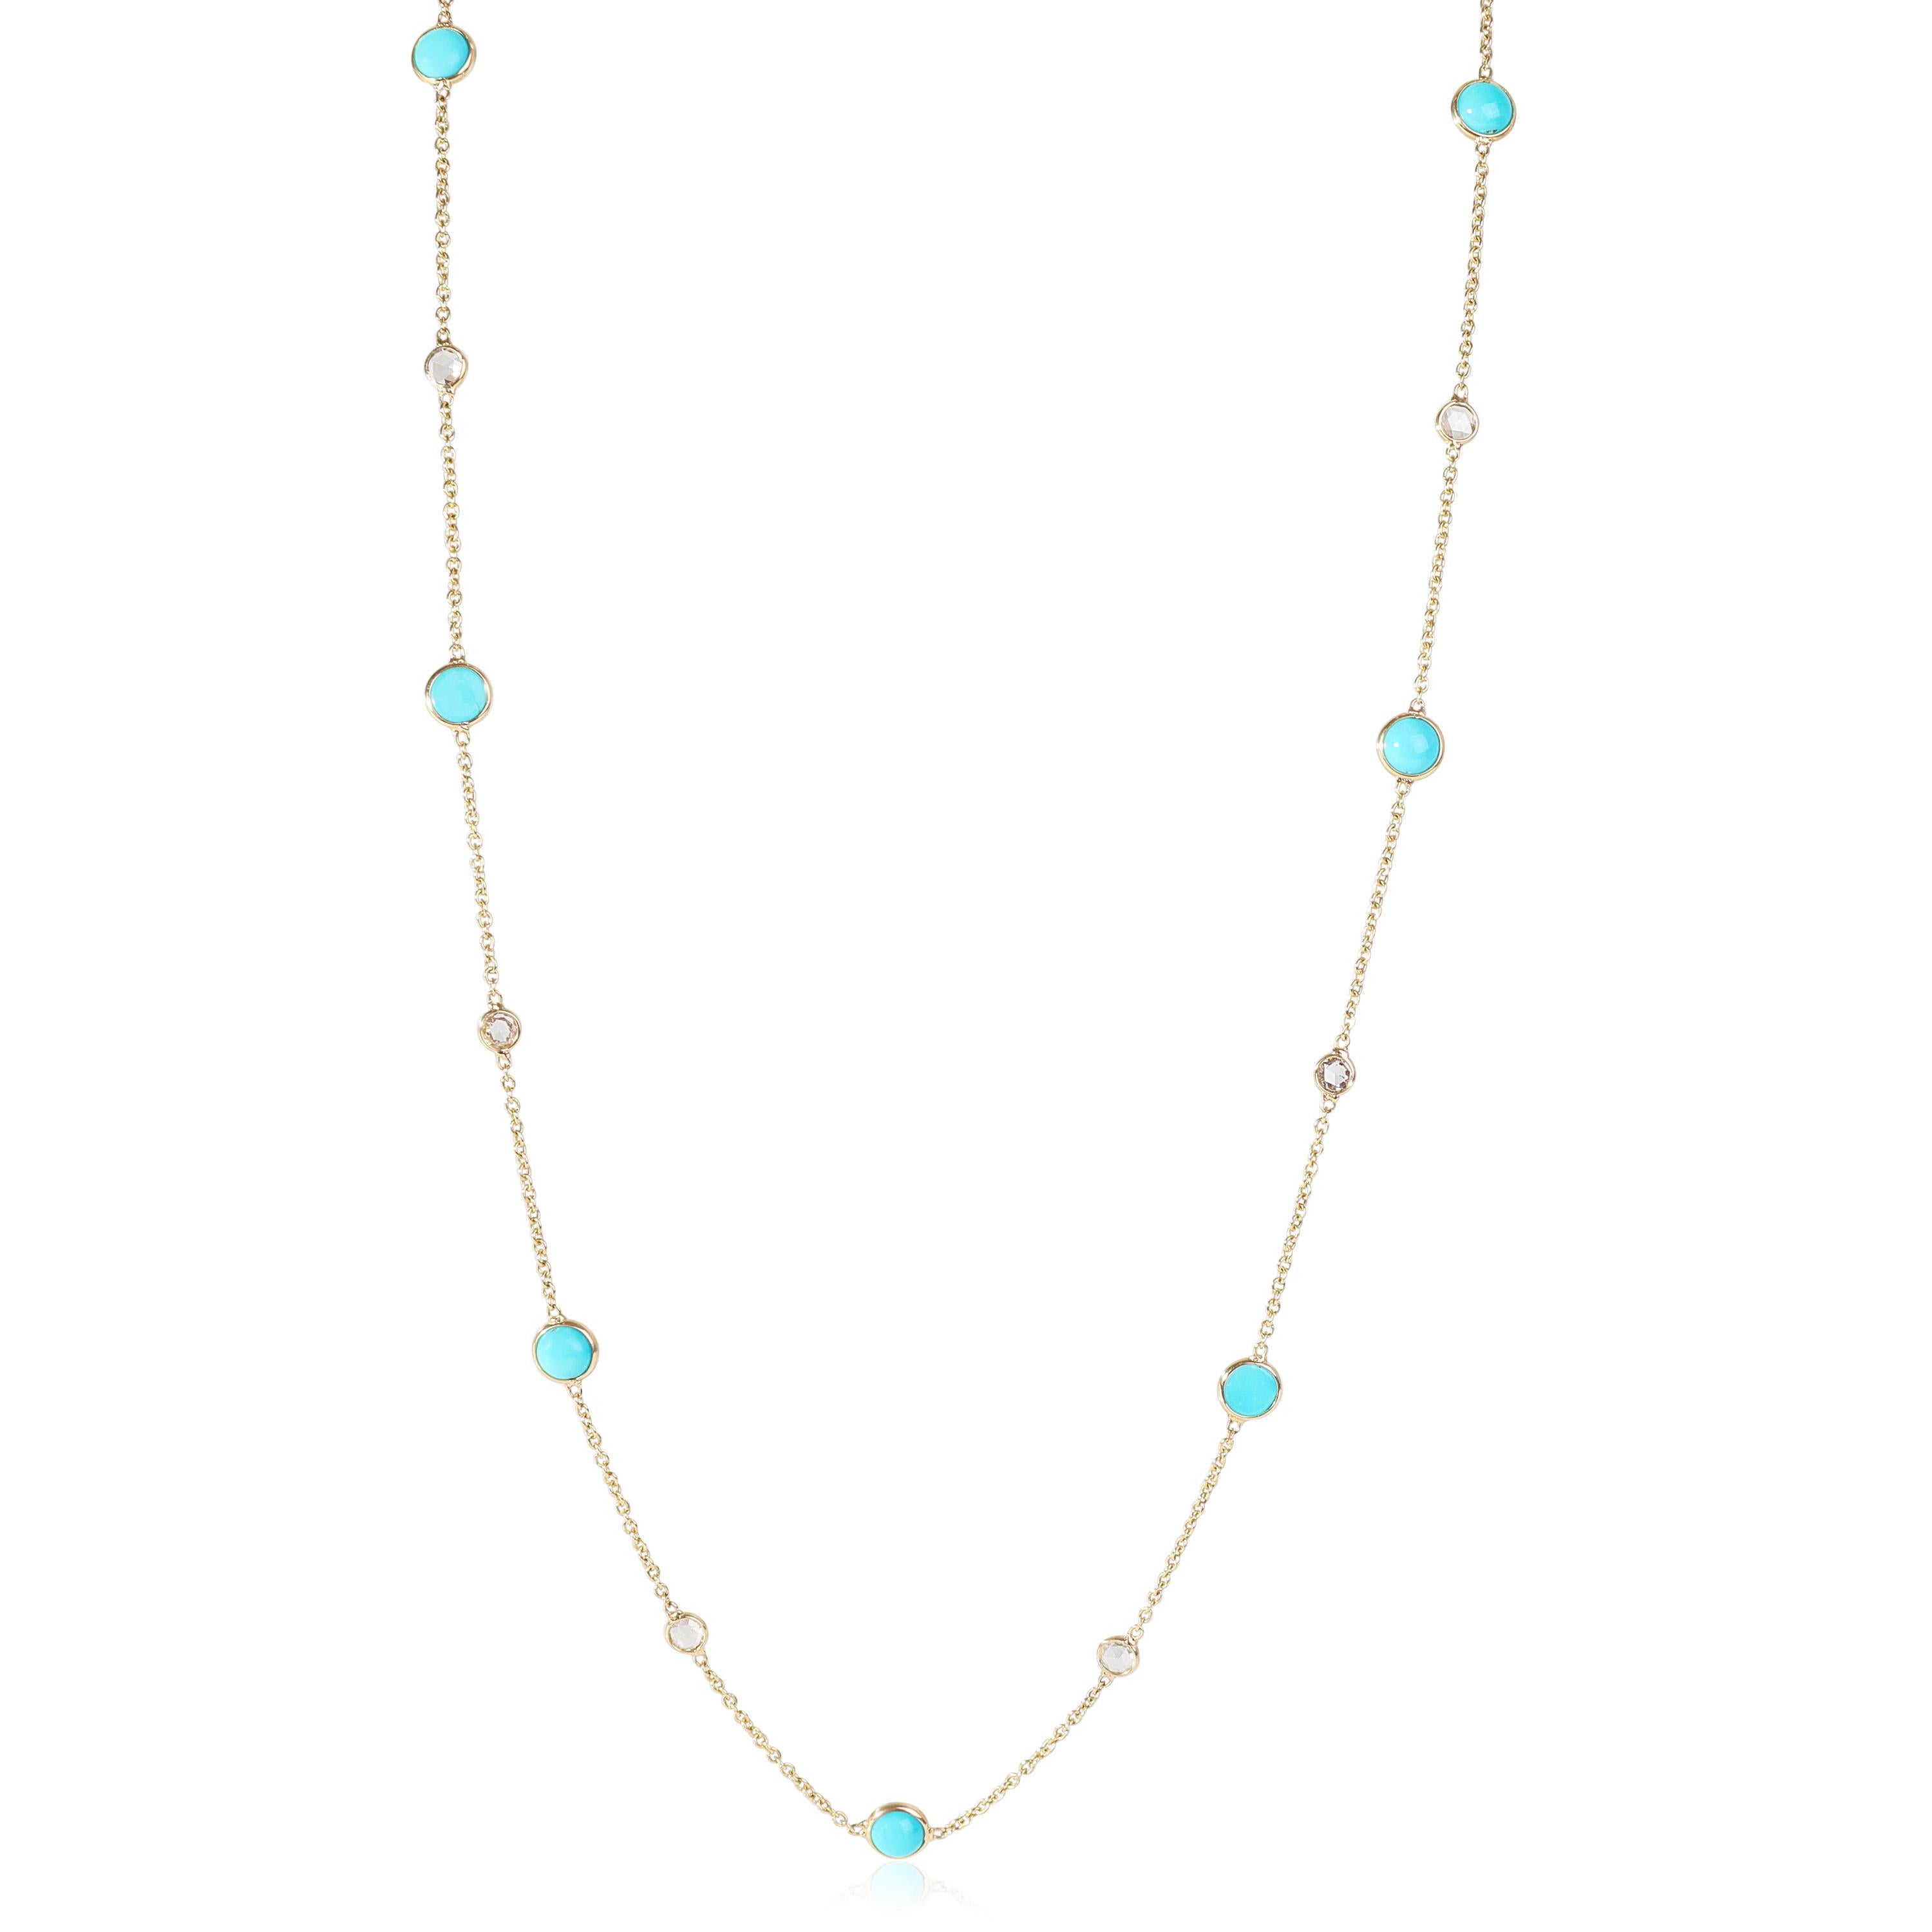 Turquoise Diamond Station Necklace in 18k Yellow Gold 0.09 CTW

PRIMARY DETAILS
SKU: 121195
Listing Title: Turquoise Diamond Station Necklace in 18k Yellow Gold 0.09 CTW
Condition Description: Retails for 2995 USD. Never Worn / Like New and in